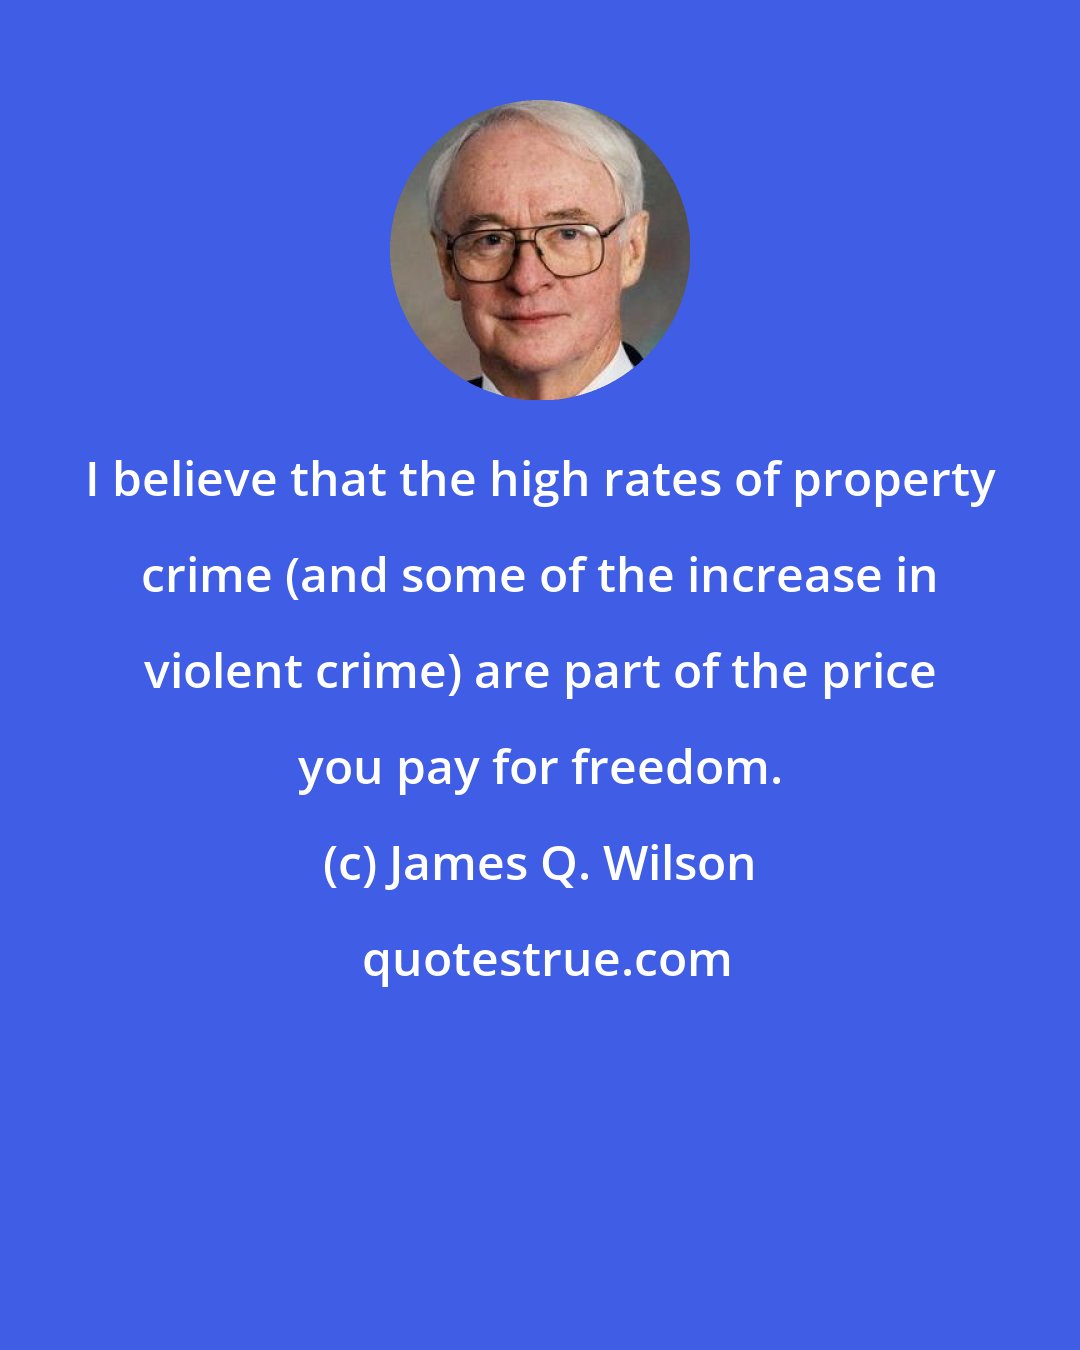 James Q. Wilson: I believe that the high rates of property crime (and some of the increase in violent crime) are part of the price you pay for freedom.